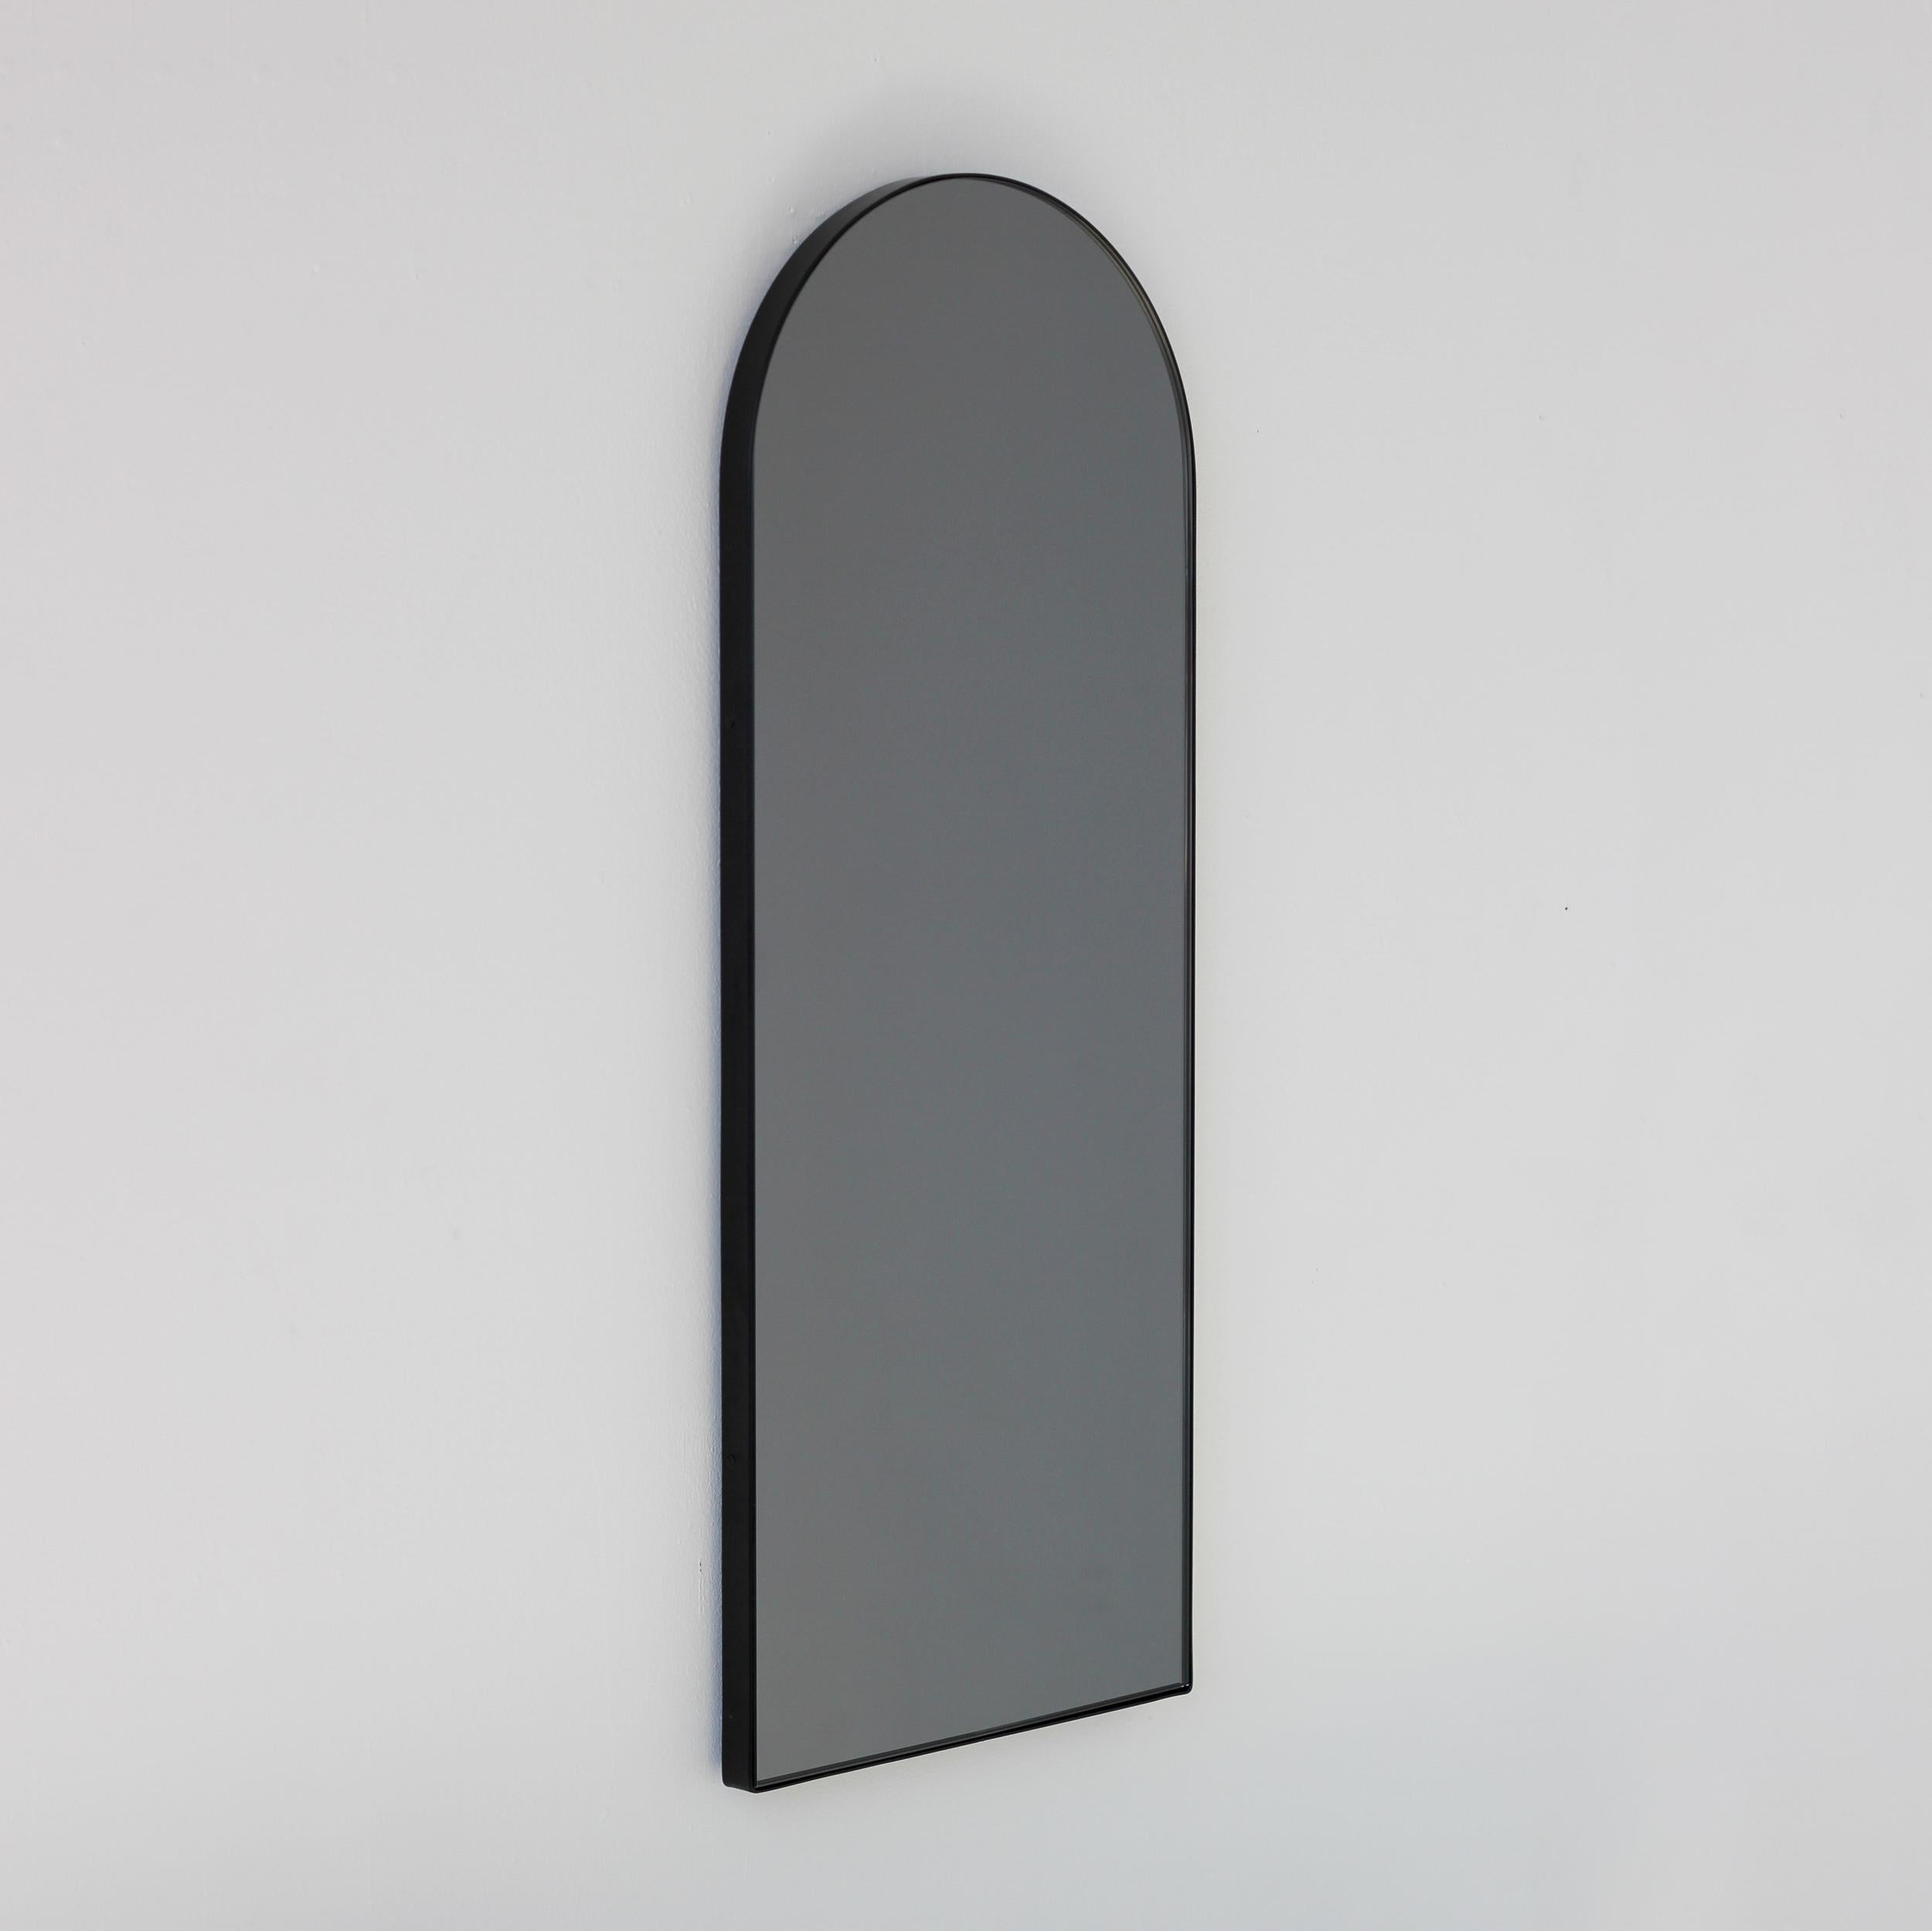 Contemporary arch shaped black tinted mirror with an elegant black frame. Designed and made in London, UK.

Our mirrors are designed with an integrated French cleat (split batten) system that ensures the mirror is securely mounted flush with the